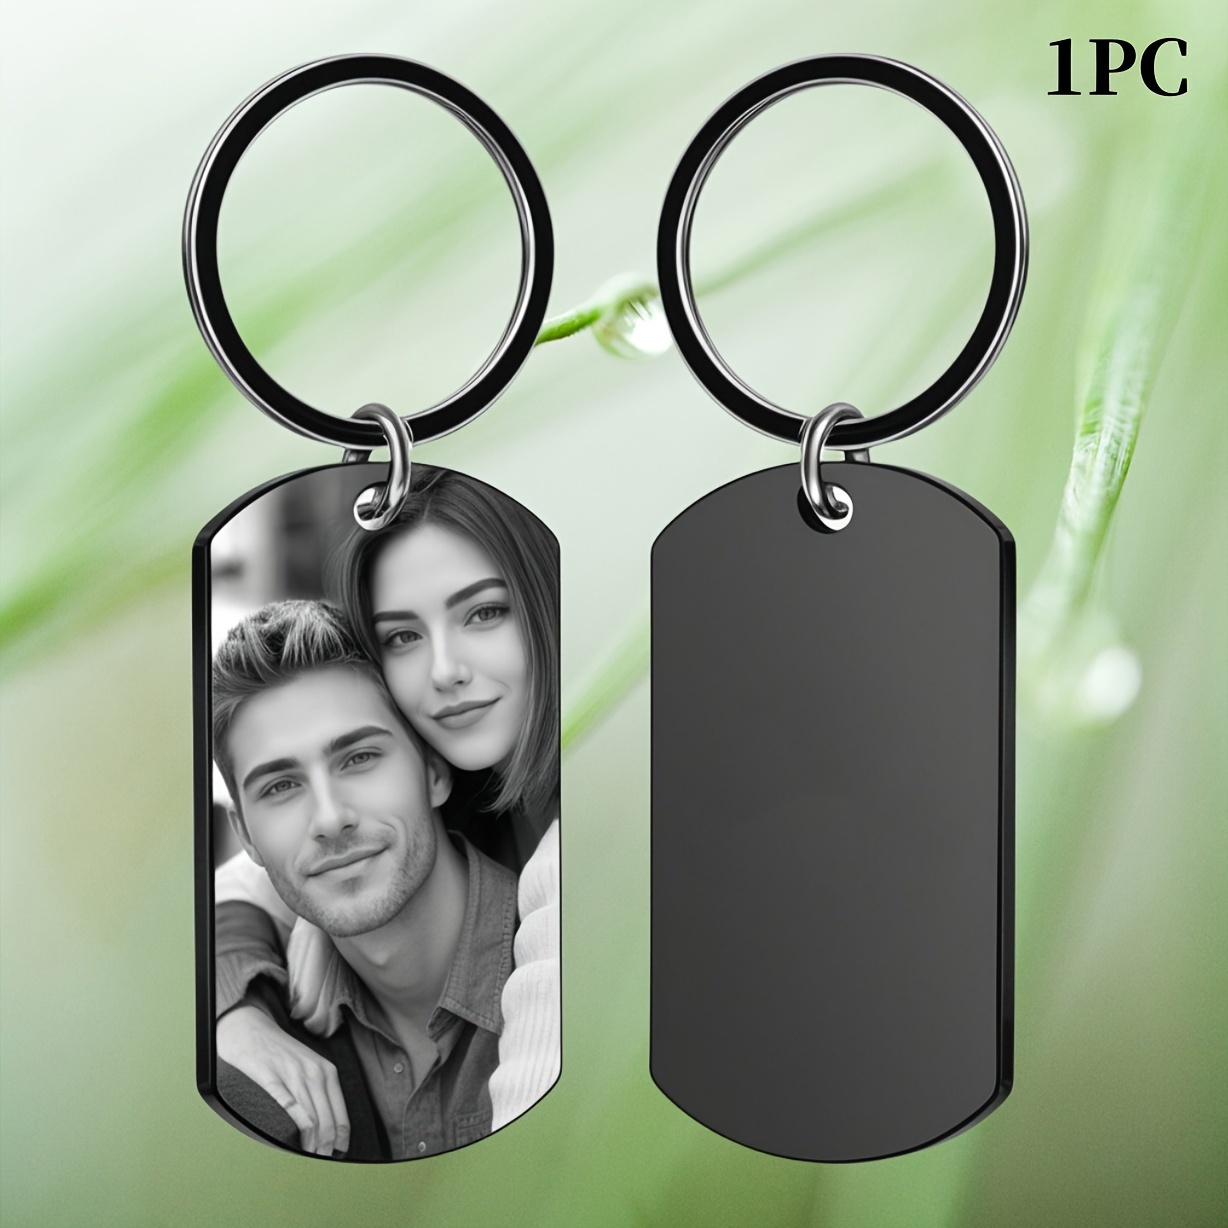 

1pc Men's Picture Custom Personalized Gift, Custom Keychain, Laser Engraved Photo, Gift For Father Boyfriend, Girlfriend, Lover